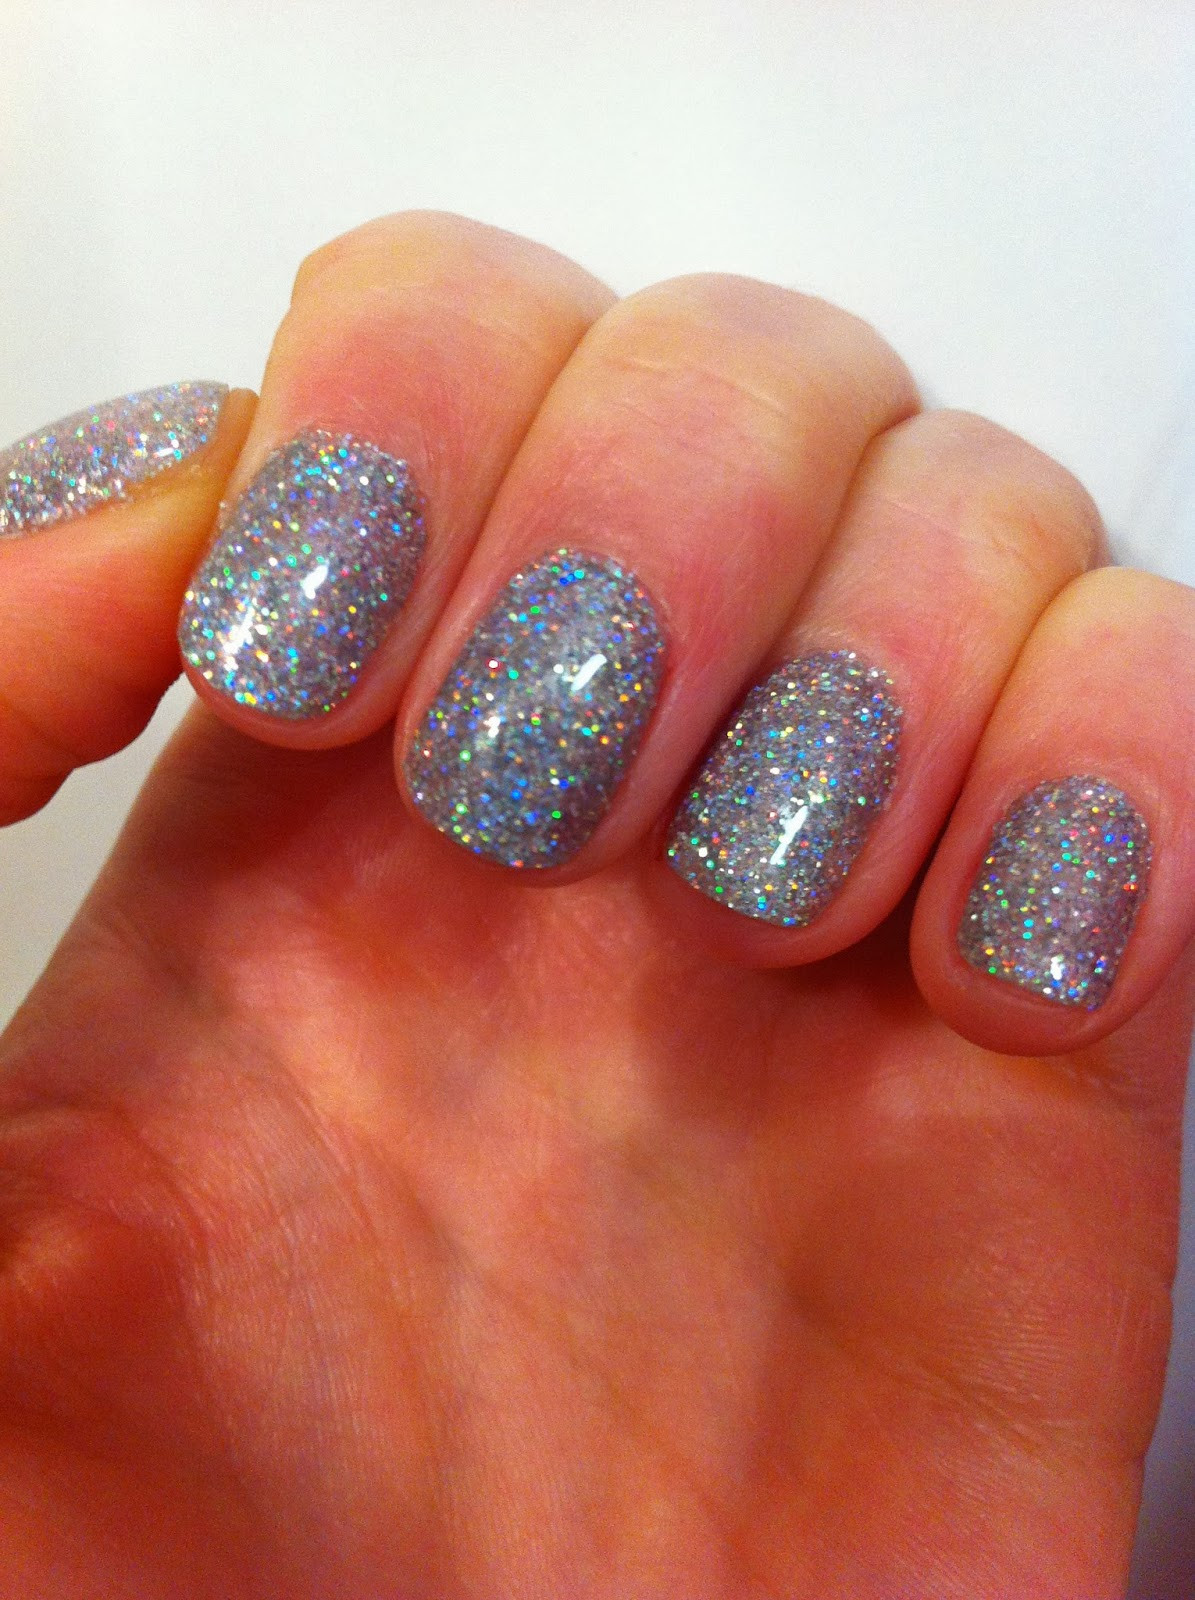 Dip Glitter Nails
 Gel Nails Dipped In Glitter Nail Ftempo